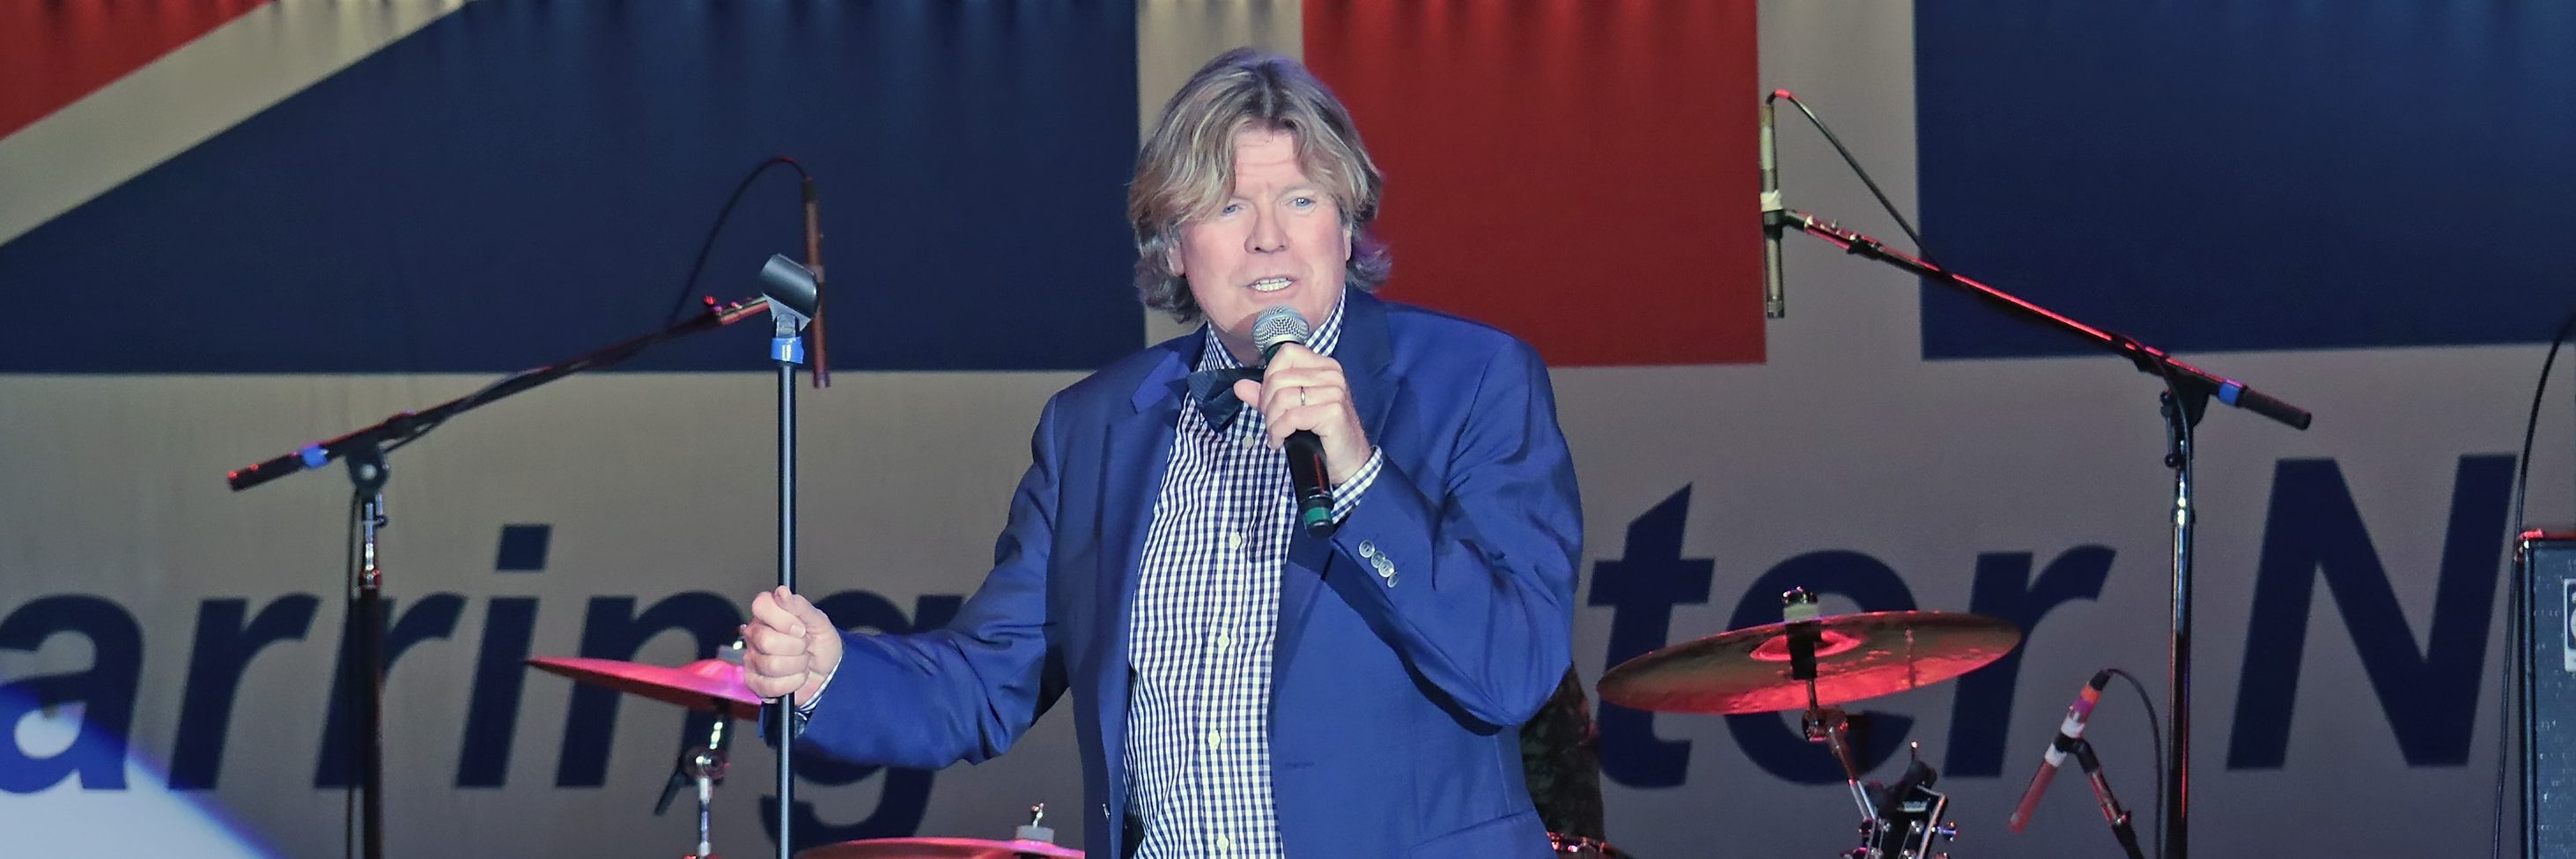 Peter Noone of Herman's Hermits performs at Resorts Superstar Theater on November 26, 2016 in Atlantic City, New Jersey.  (Photo by Donald Kravitz/Getty Images)